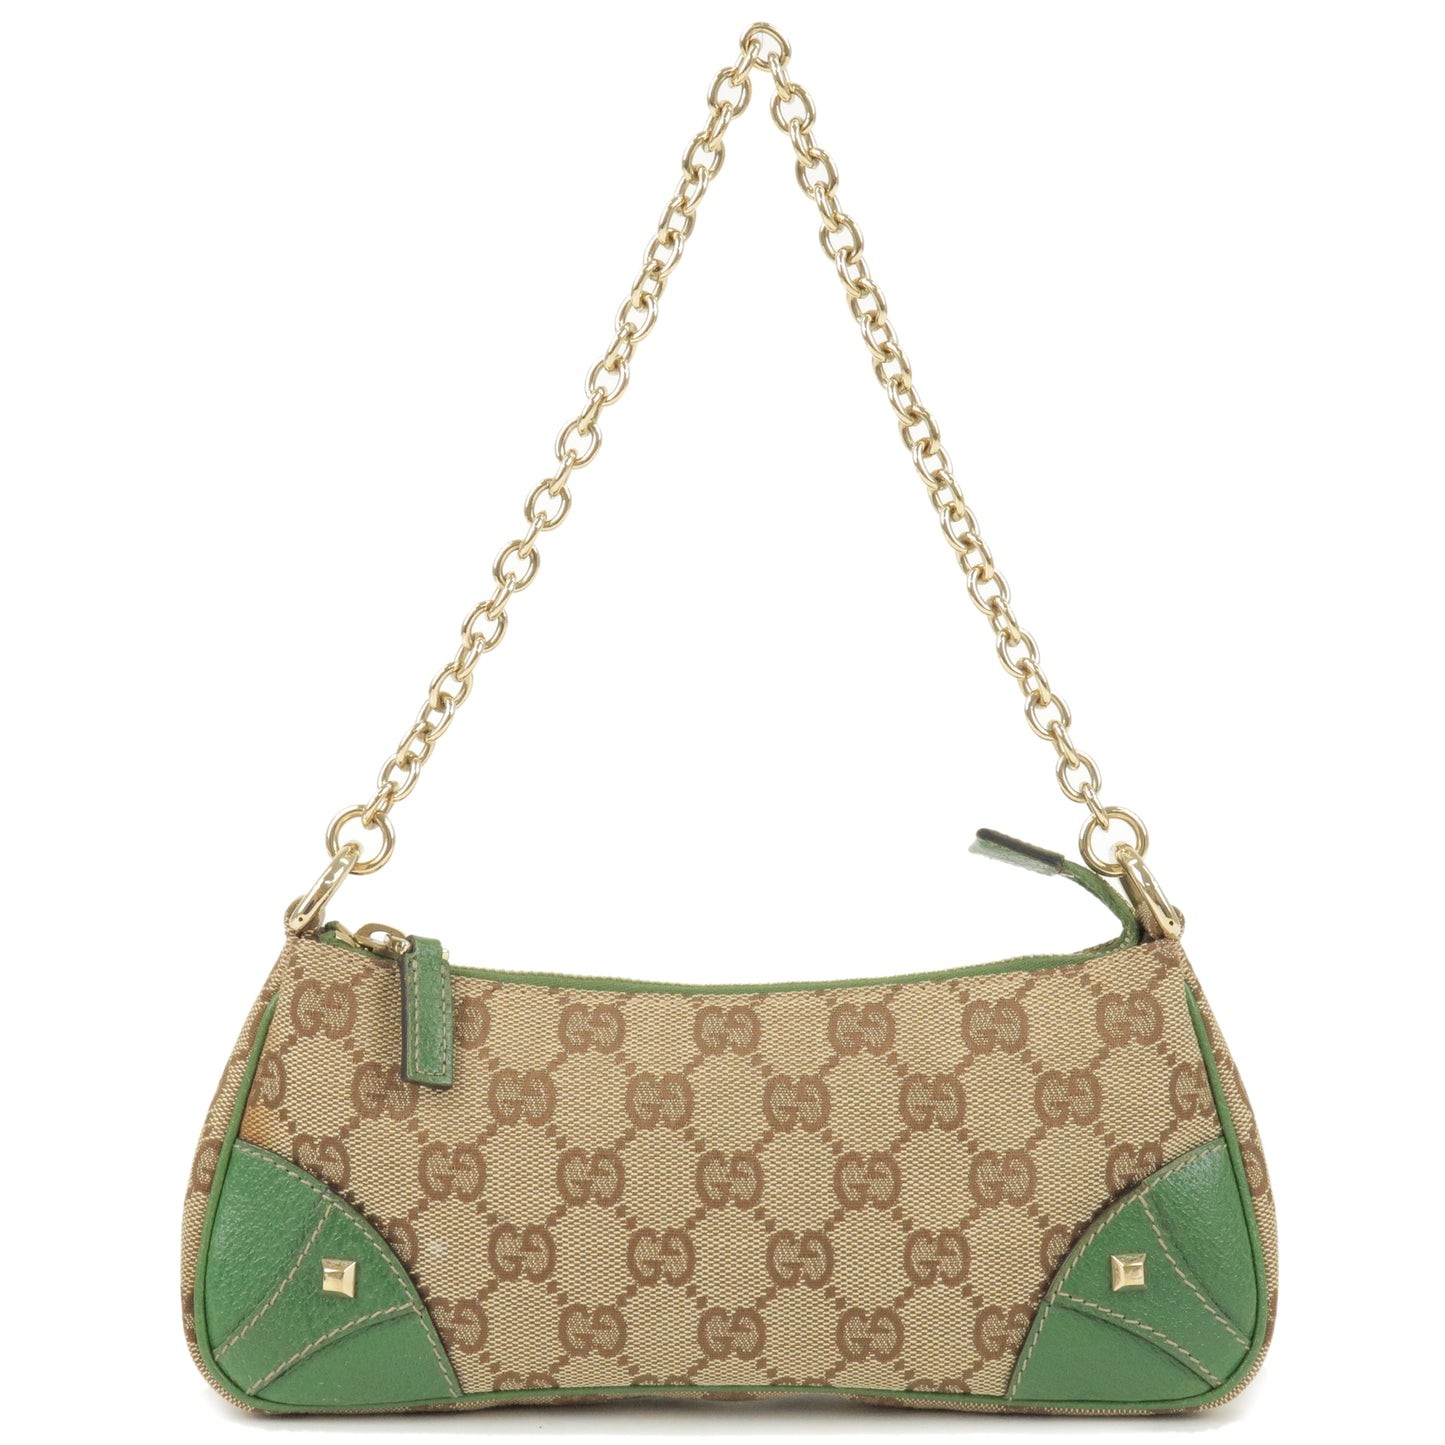 GUCCI-GG-Canvas-Leather-Studs-Chain-Shoulder-Bag-Green-120940